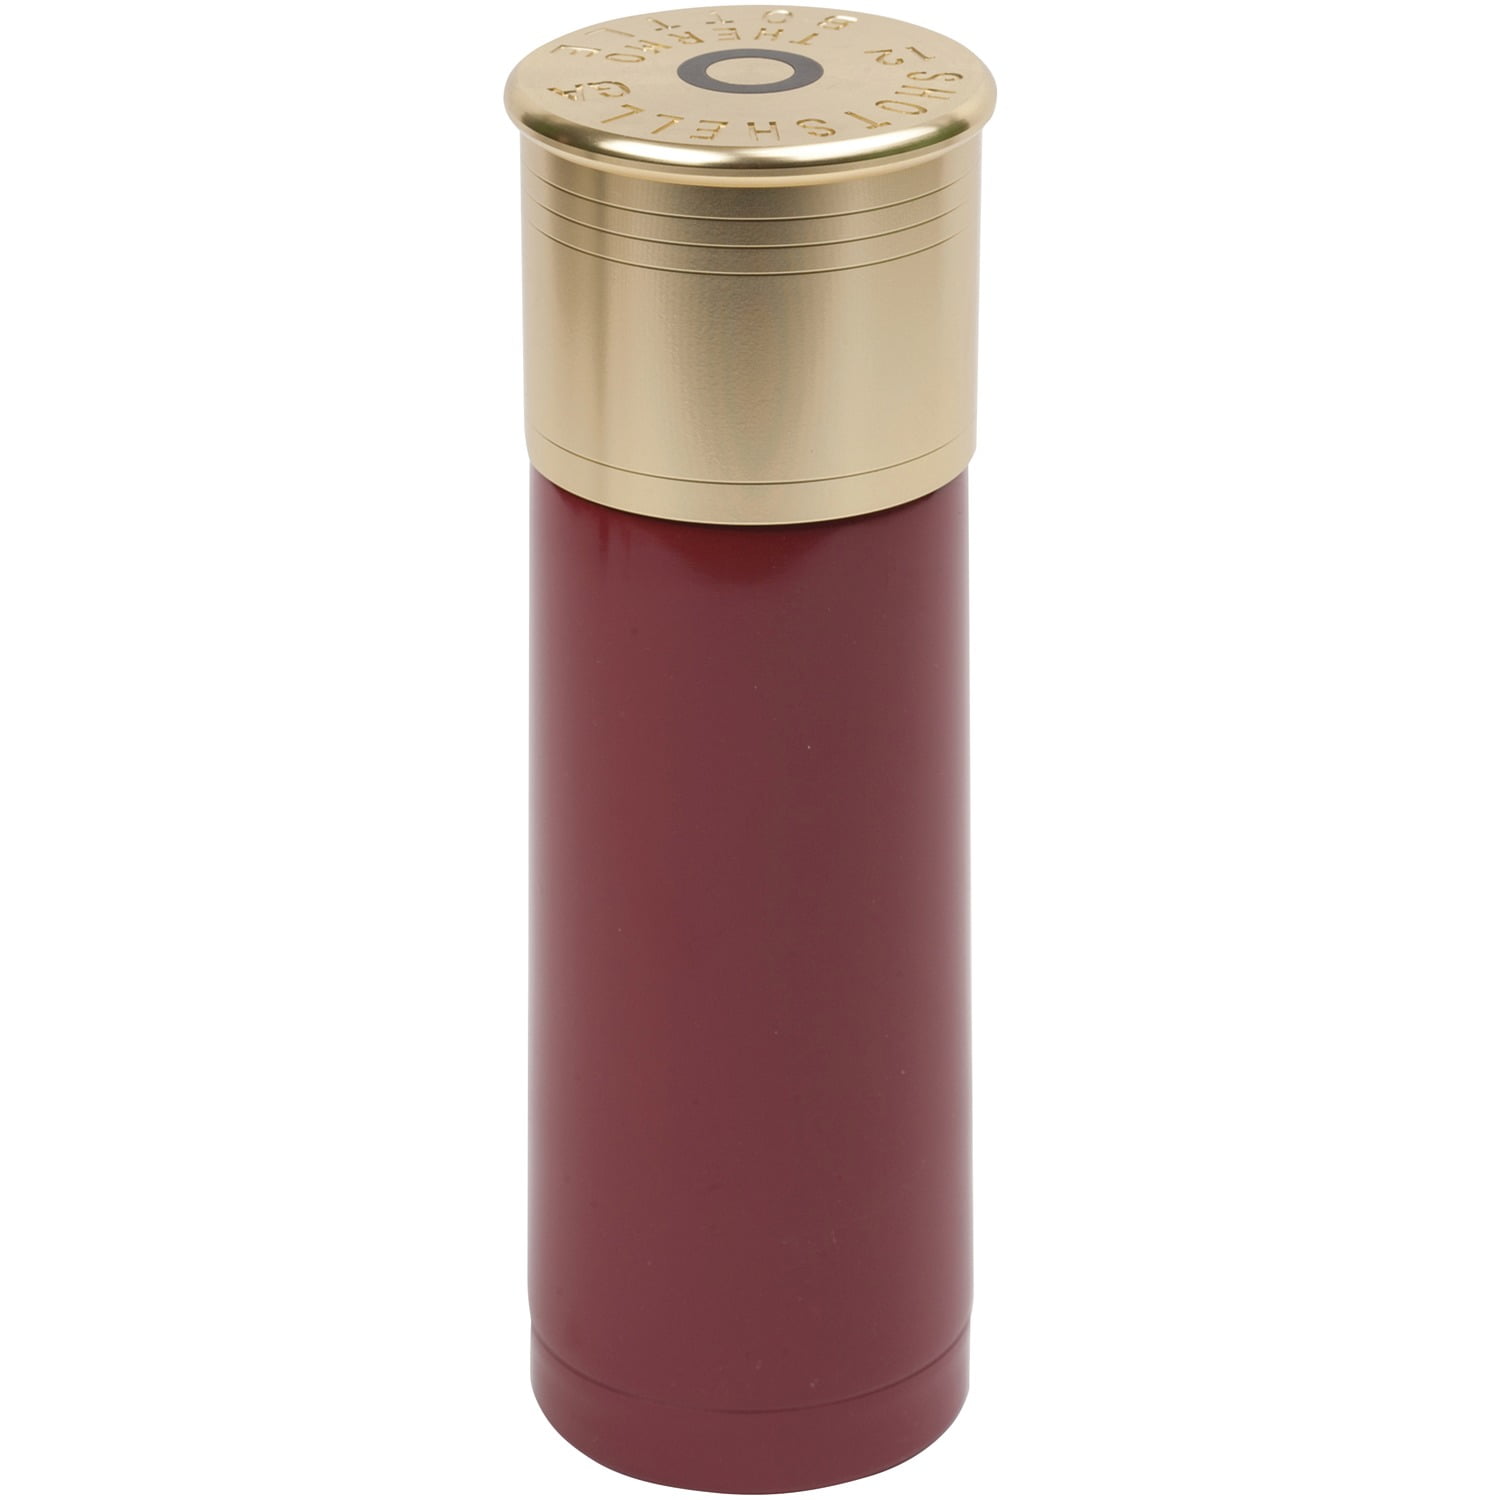 Stansport 8970-60 12 Gauge Shotshell Thermo Bottle - Red - Canteen Camping  Hiking Travel Outdoors 